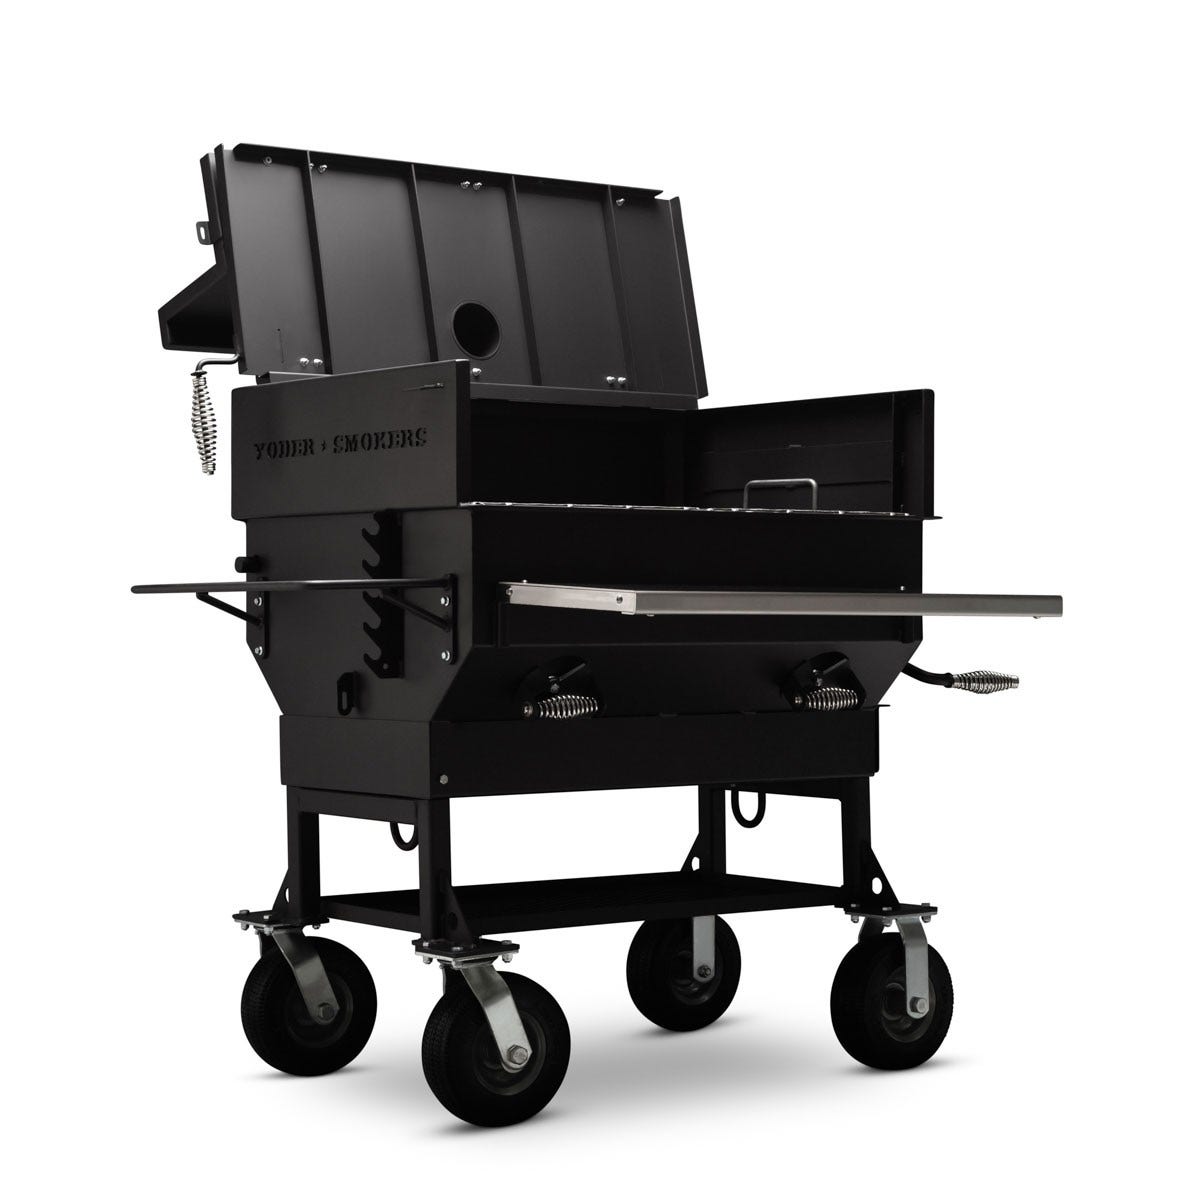 Yoder Smokers Adjustable Charcoal Grill Outdoor Grills 24